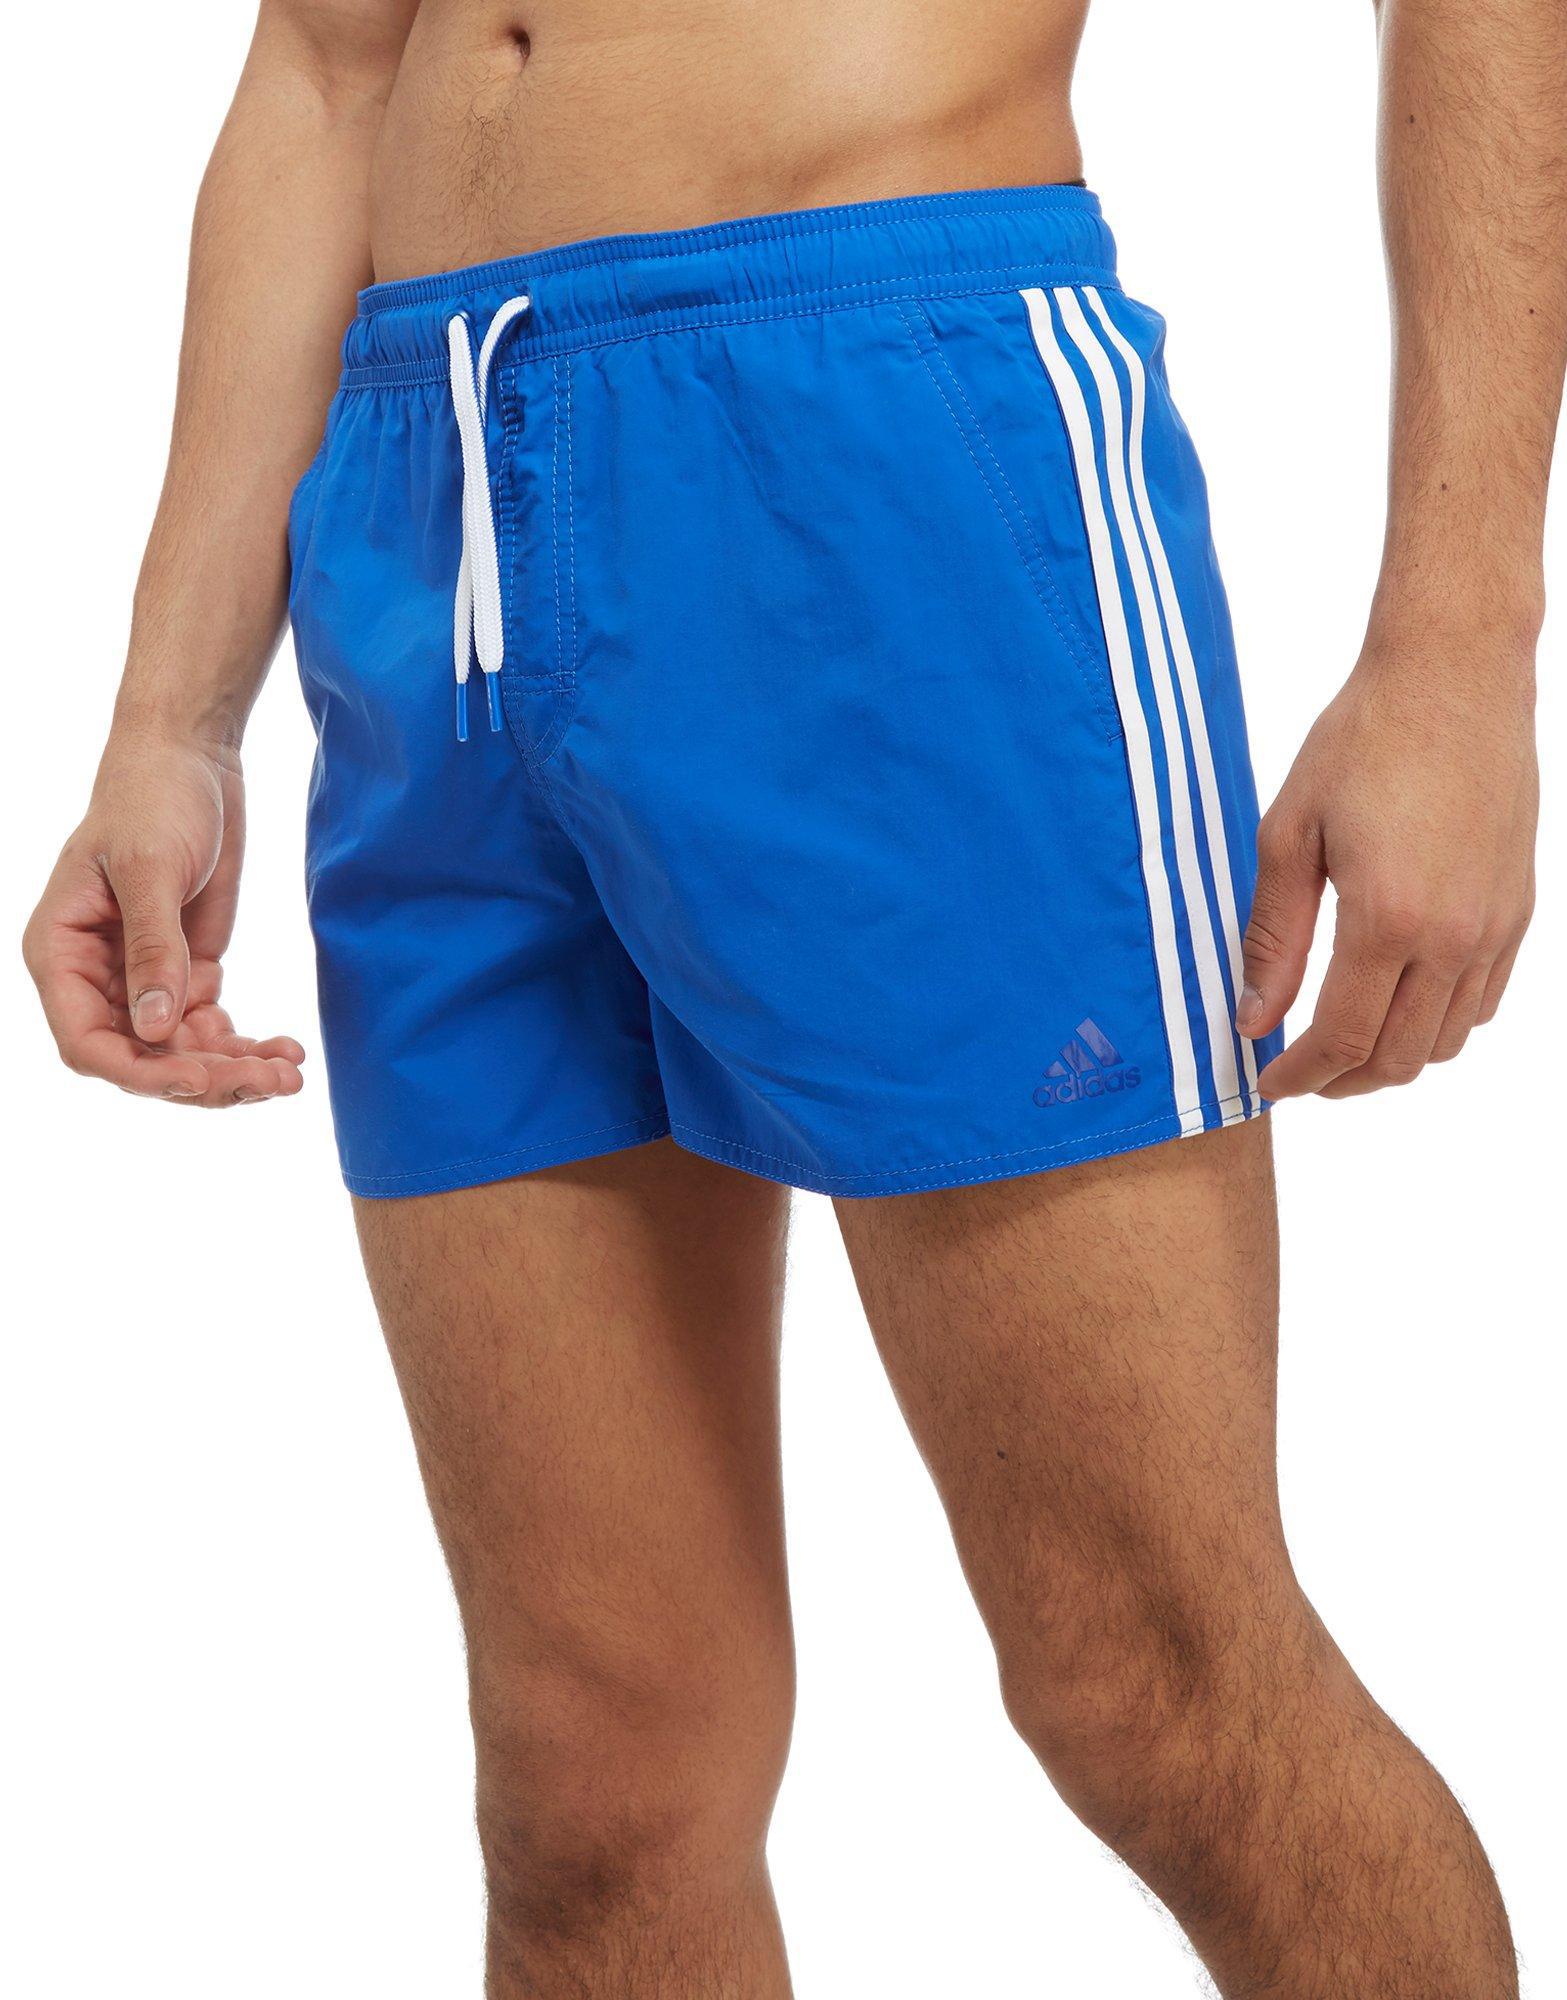 adidas Synthetic 3-stripes Swim Shorts in Blue for Men - Lyst